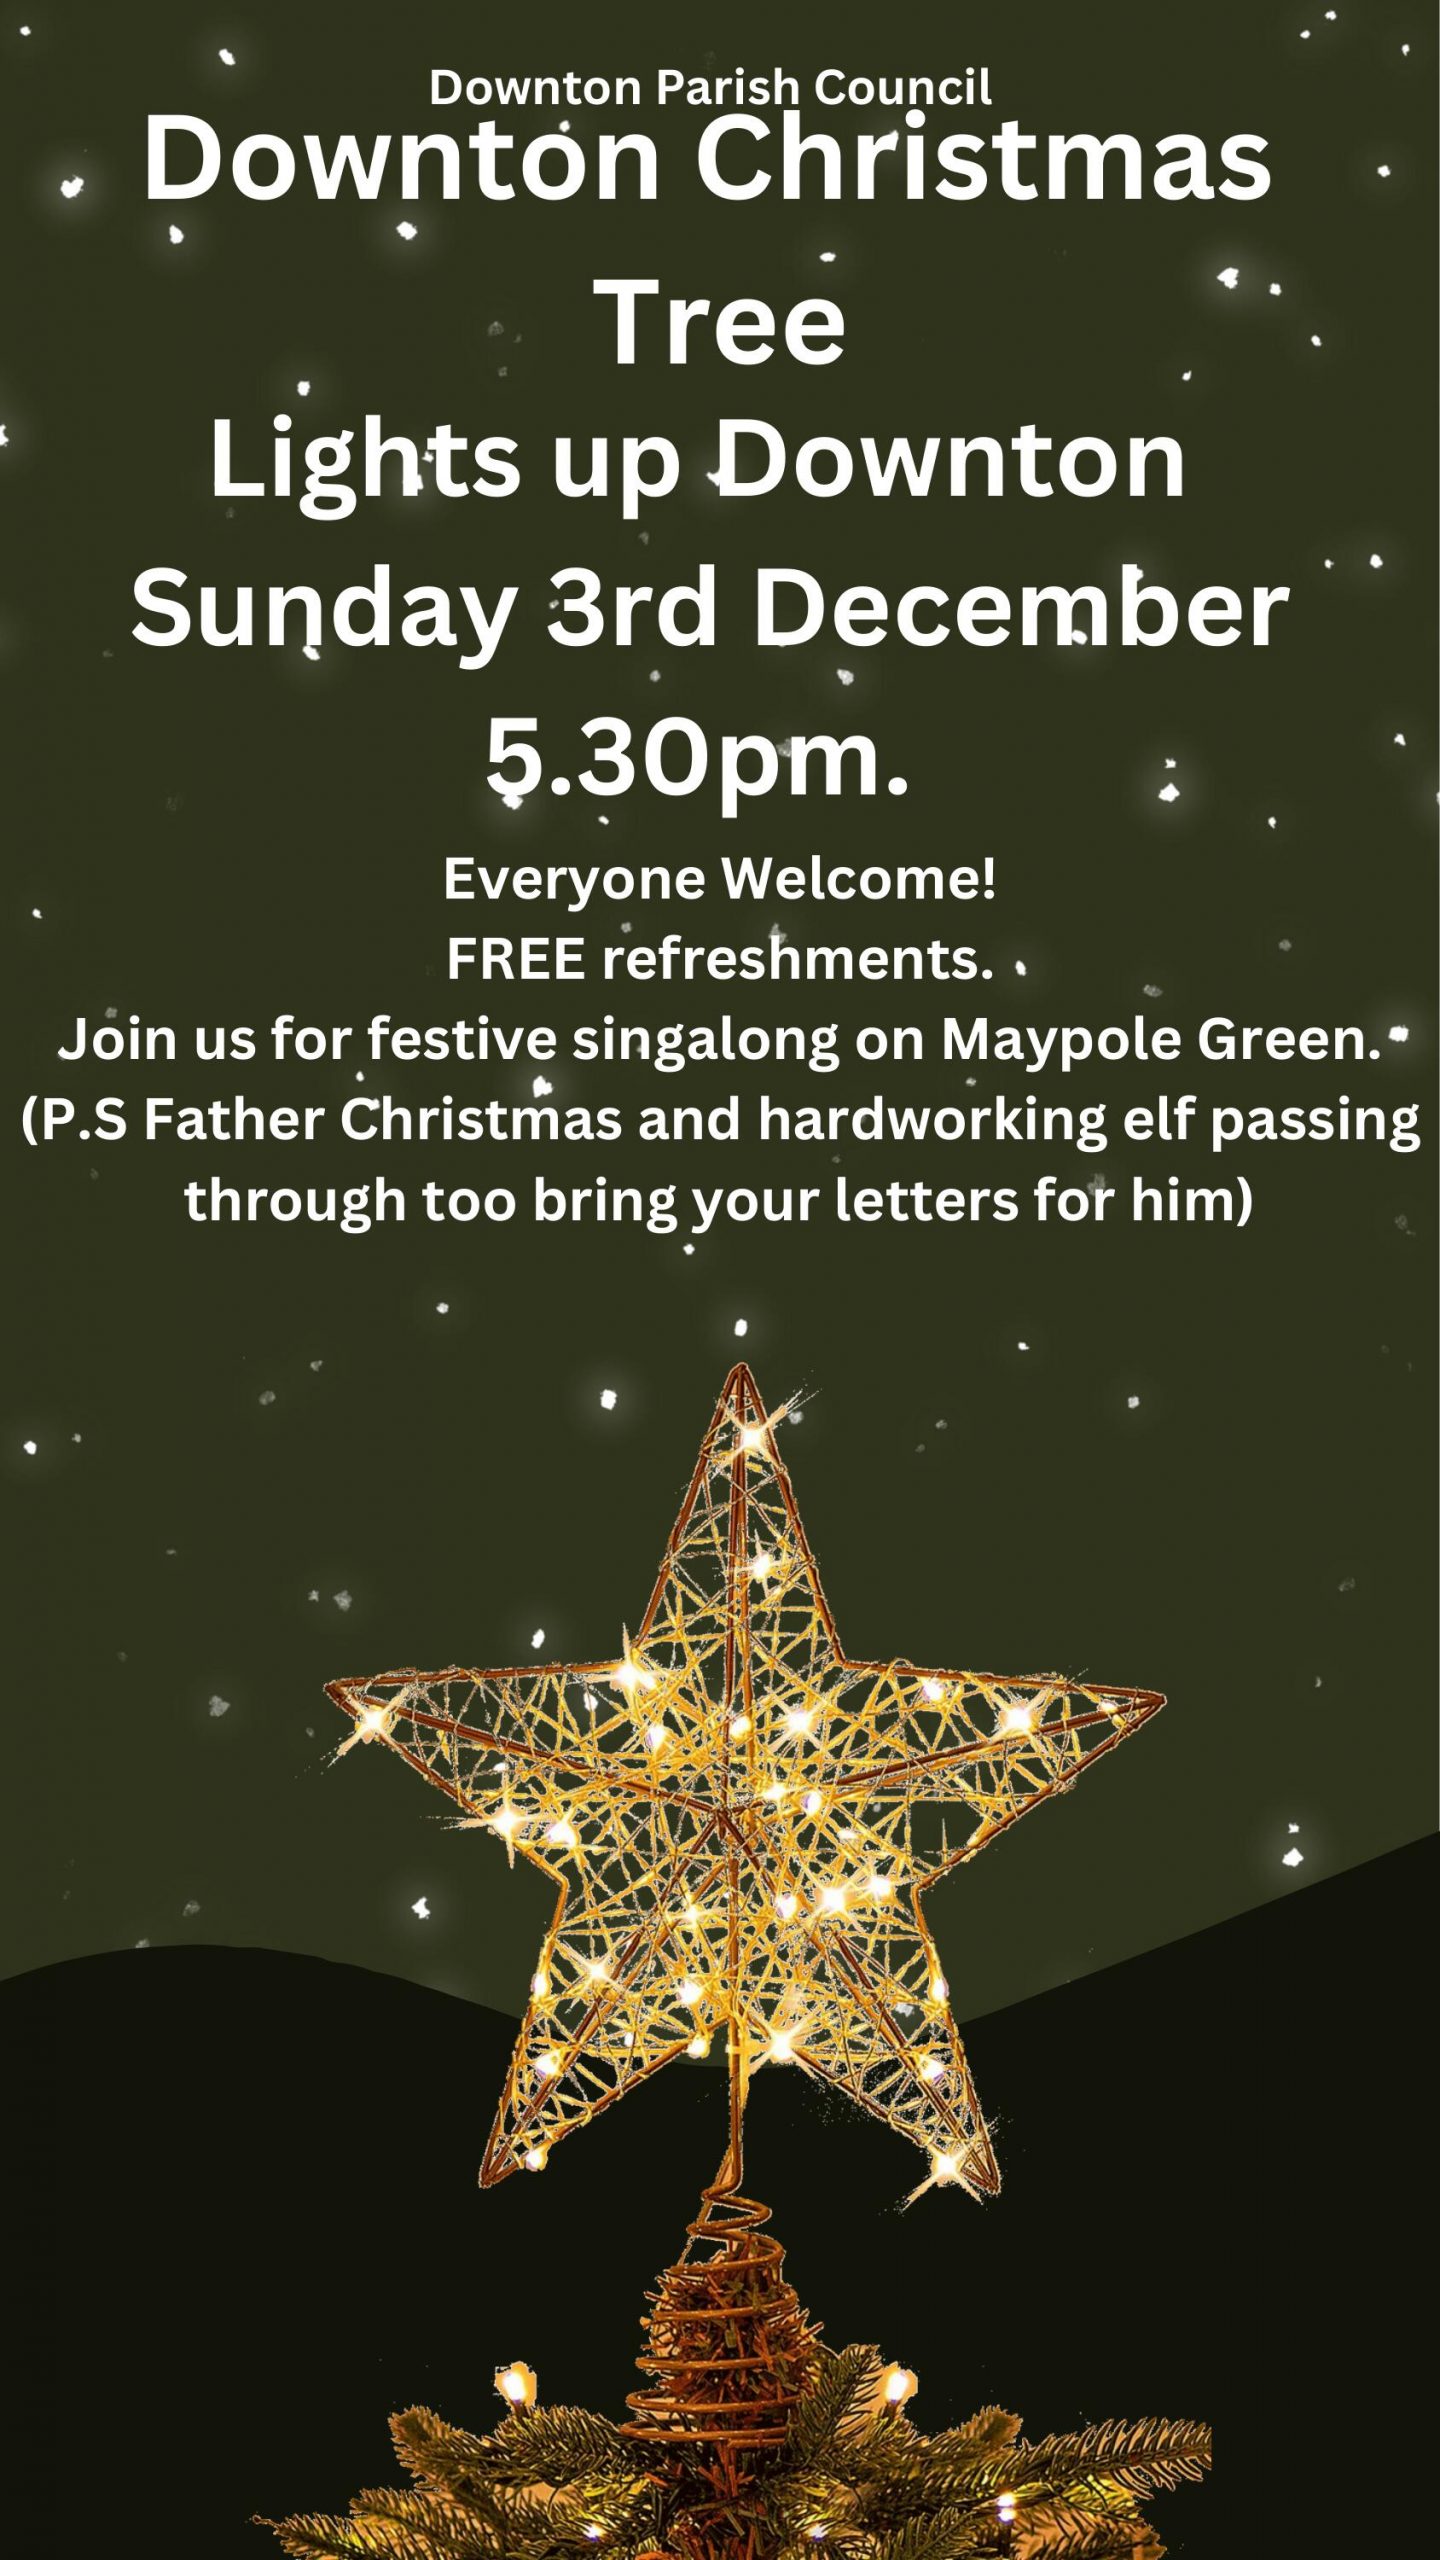 Poster. Image of star on top of a Christmas Tree. Downton Parish Council Downton Christmas Tree Light Up Downton Sunday 3rd December 5.30pm. Everyone Welcome! FREE Refreshments Join us for festive singalong on Maypole Green. (p.s. Father Christmas and hardworking elf passing through too, bring your letters for him)